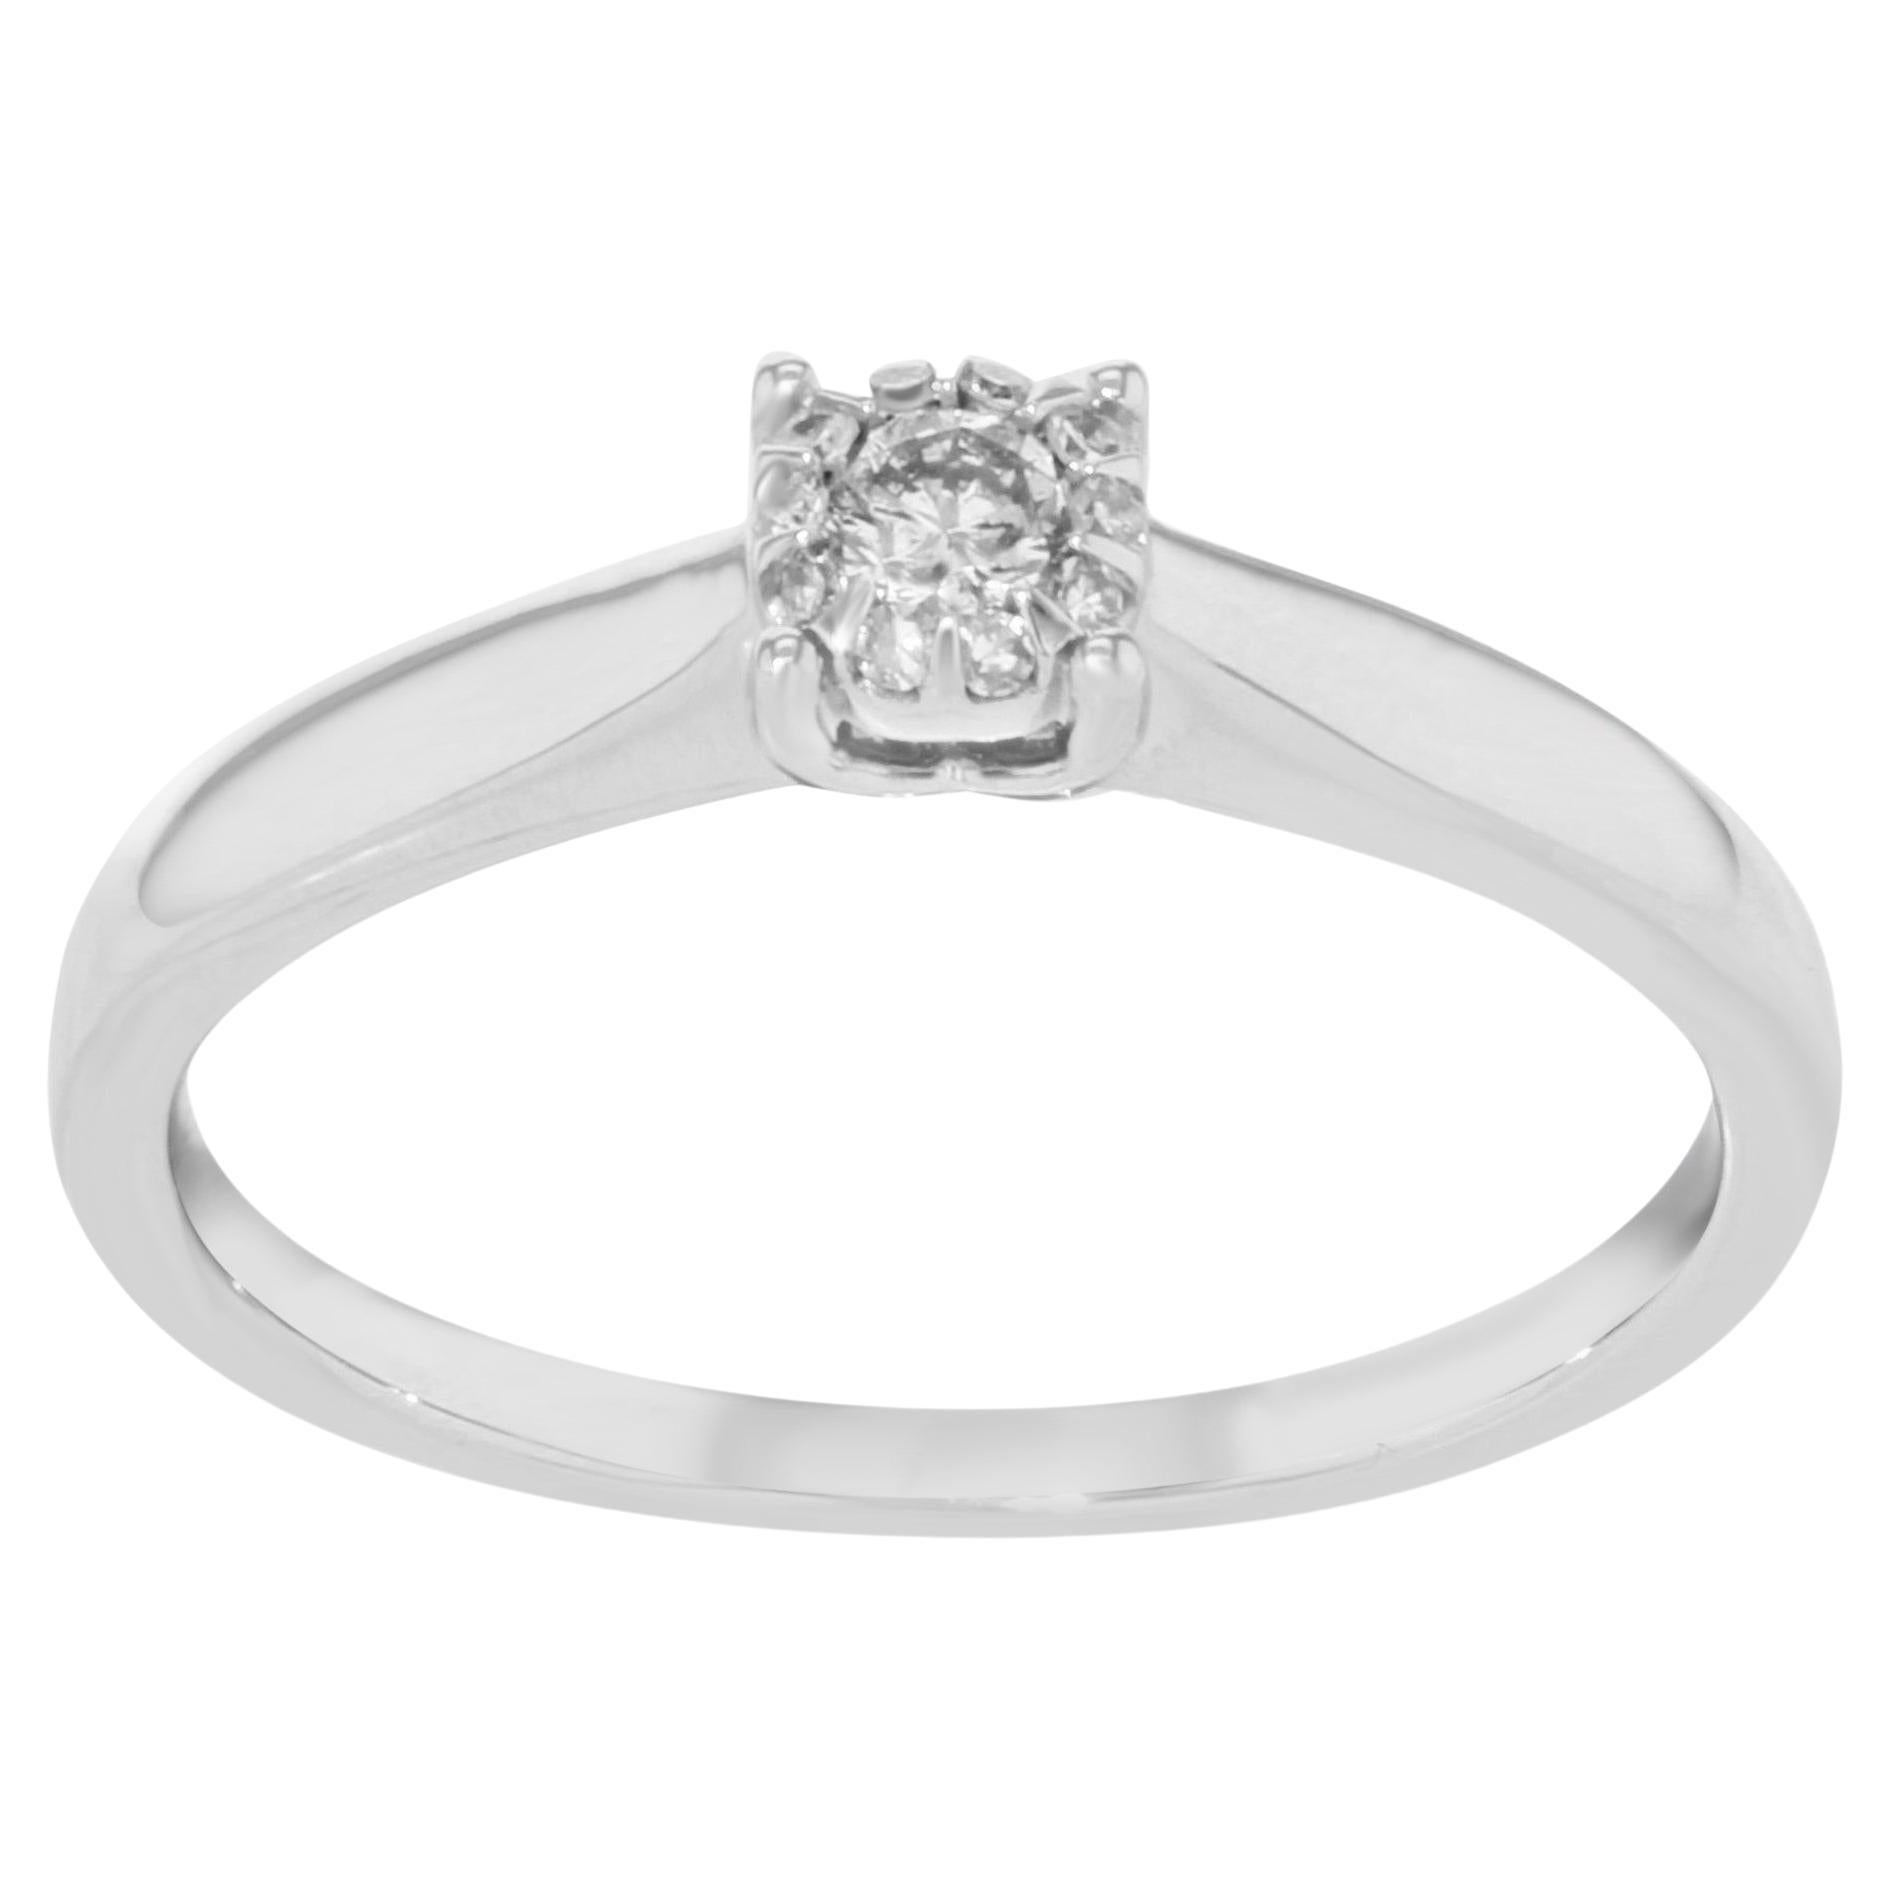 Bliss by Damiani Diamond Engagement Ring 18k White Gold 0.12 Cttw For Sale